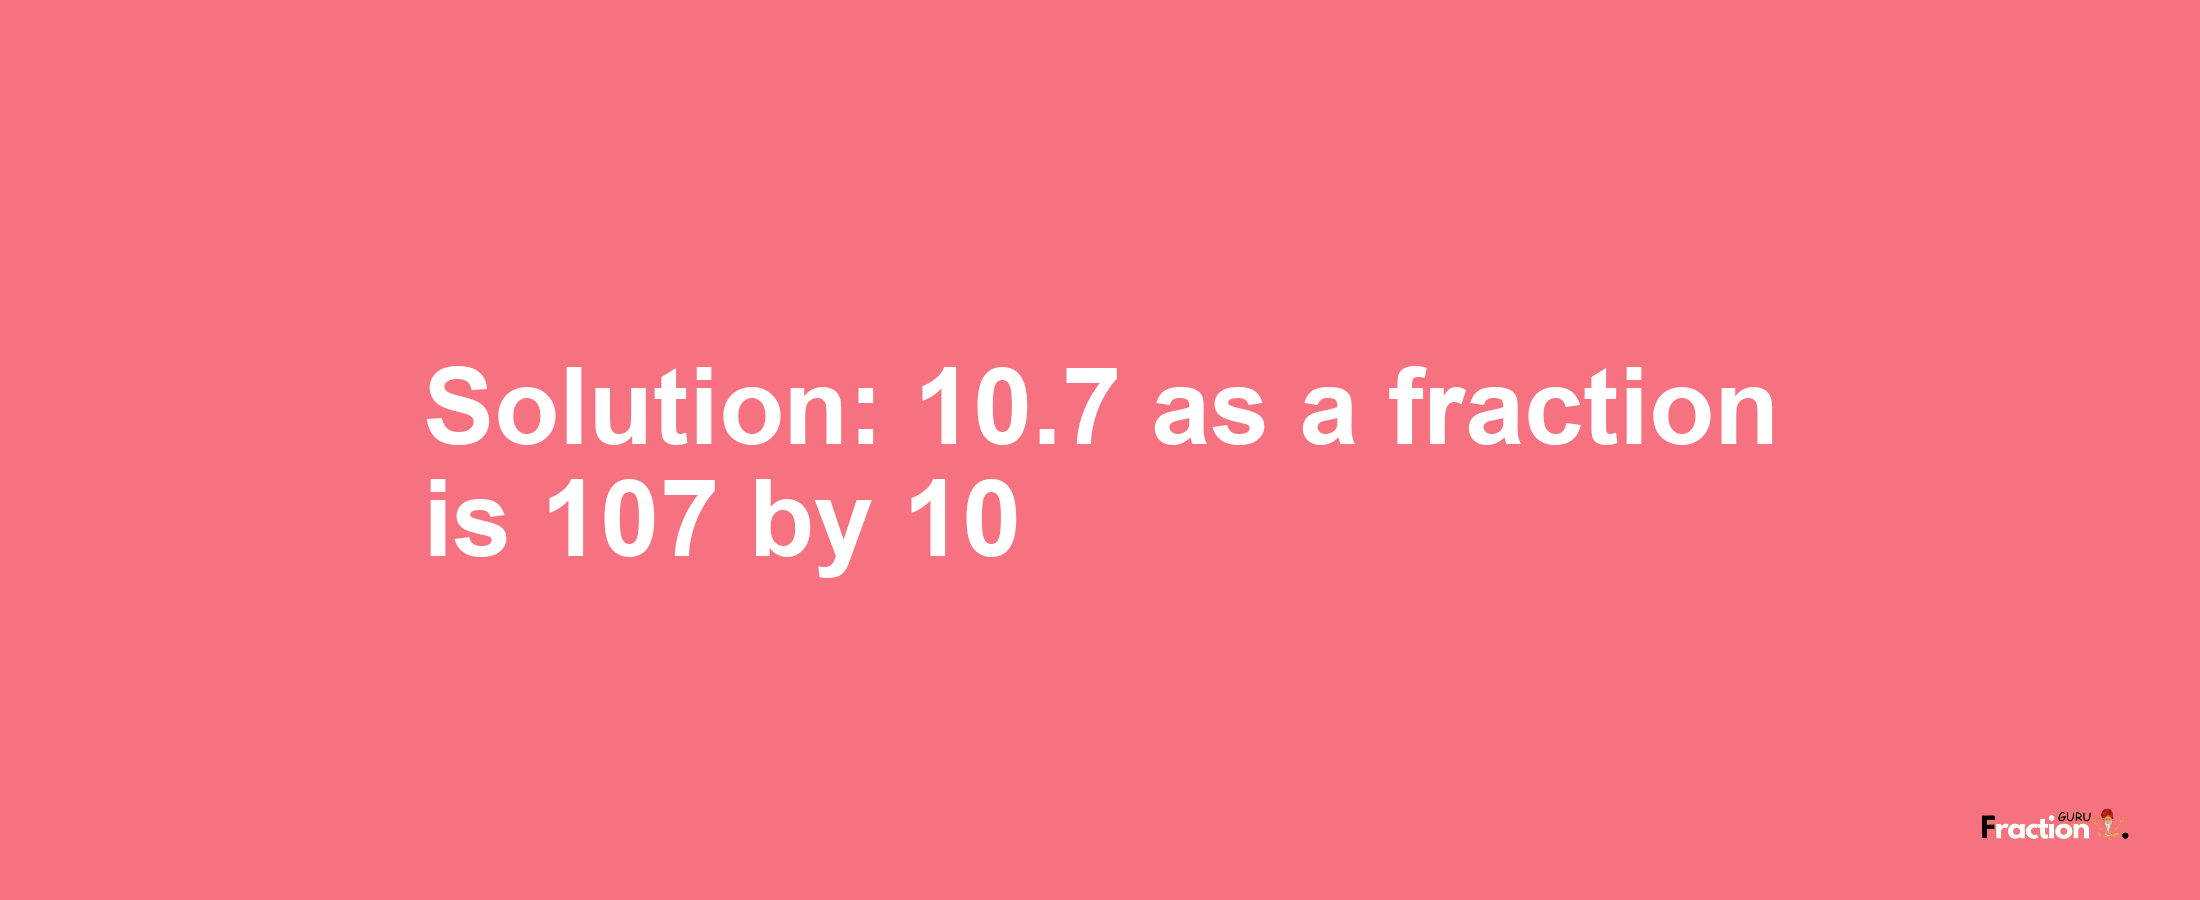 Solution:10.7 as a fraction is 107/10